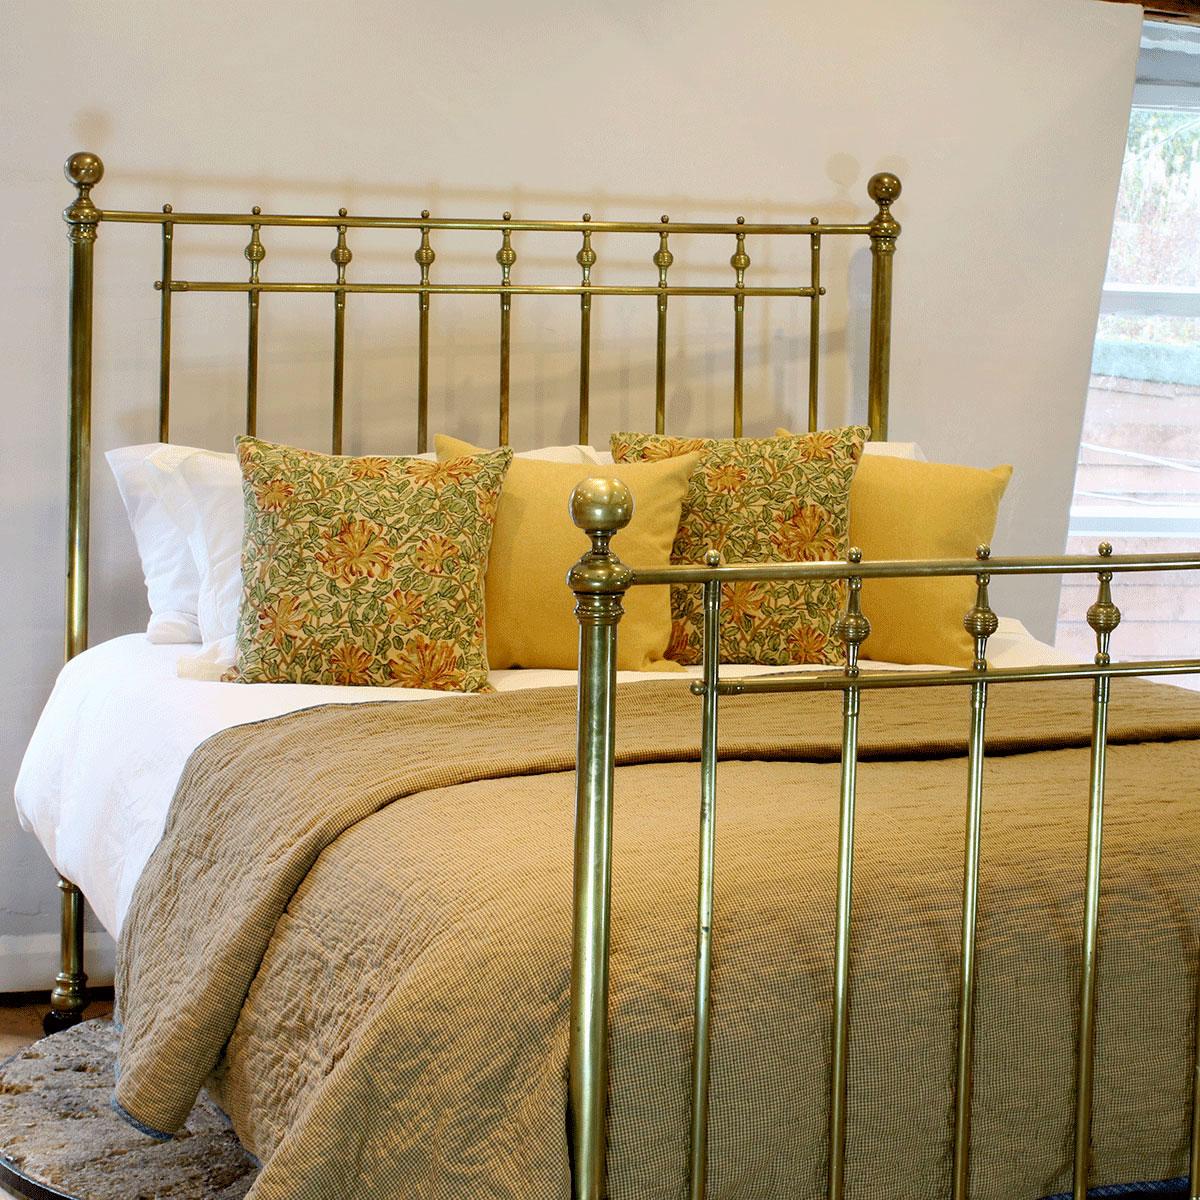 A superb all brass bed from the Victorian era with spindle decoration and fine original patina. From the late 19th century.

This bed accepts a UK King size or US Queen size (5ft, 60in or 150cm wide) base and mattress set.

The price includes a